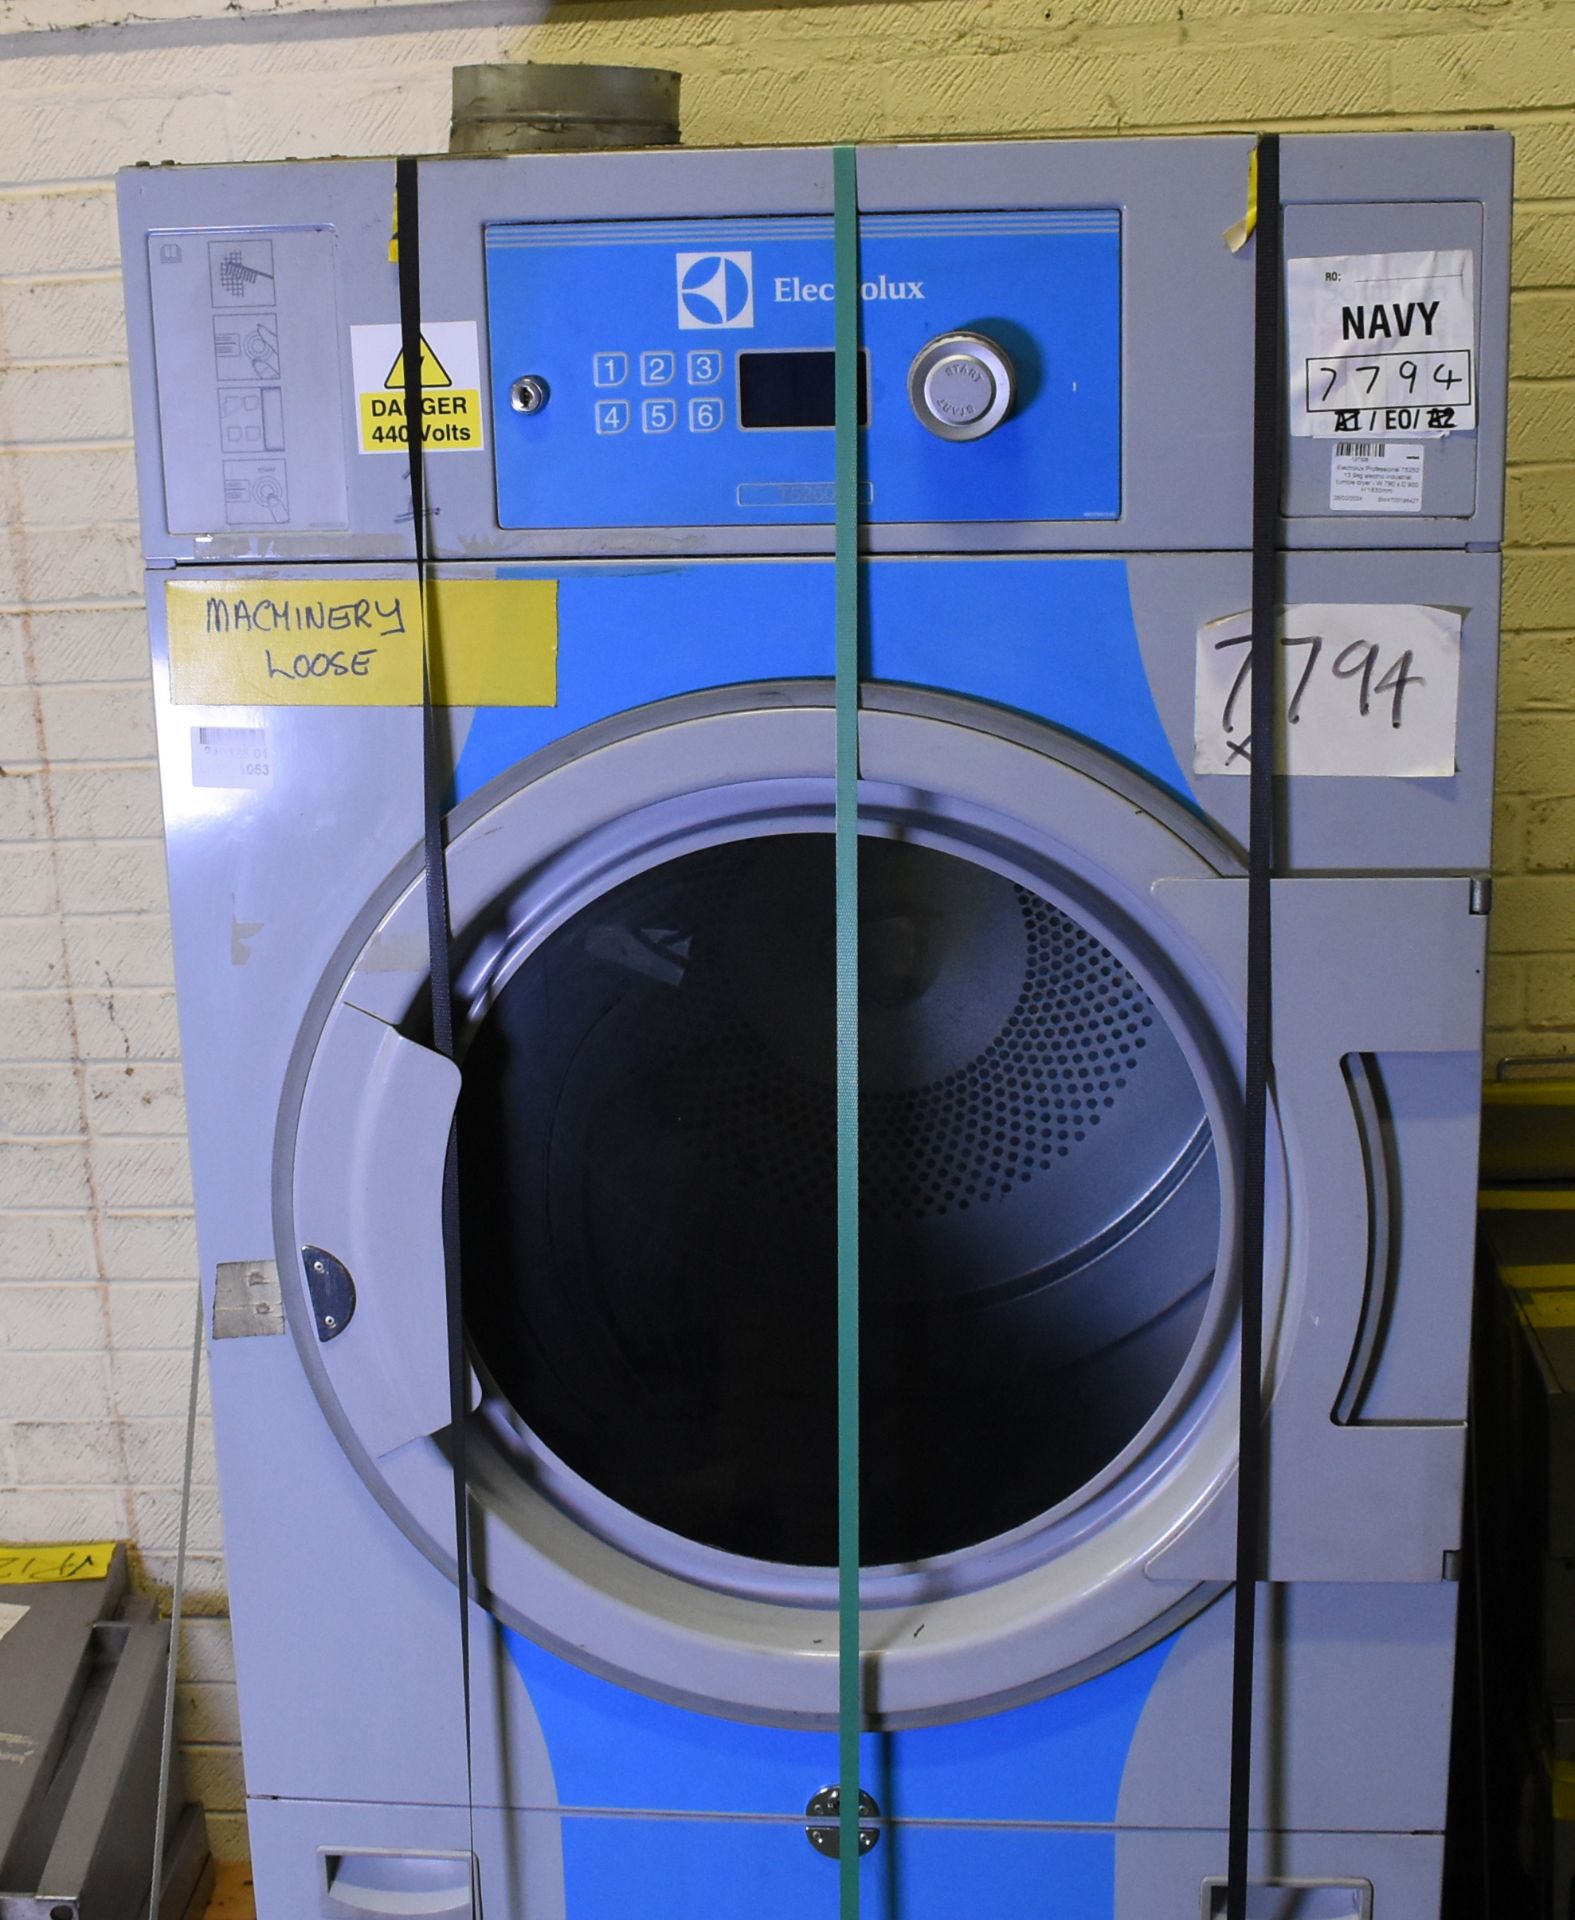 Electrolux Professional T5250 13.9kg electric industrial tumble dryer - W 790 x D 900 x H 1830mm - Image 4 of 7